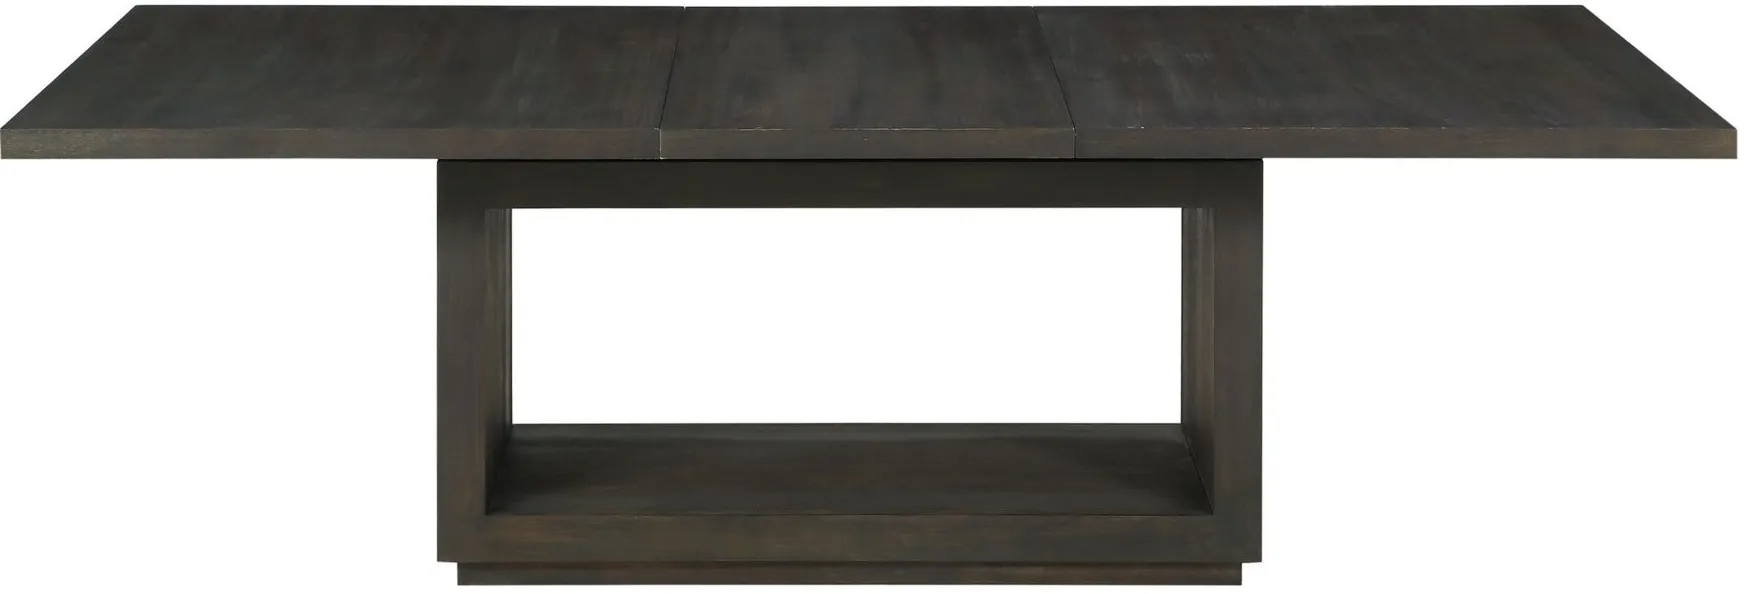 Oxford Dining Table w/ Leaf in Basalt Gray by Bellanest